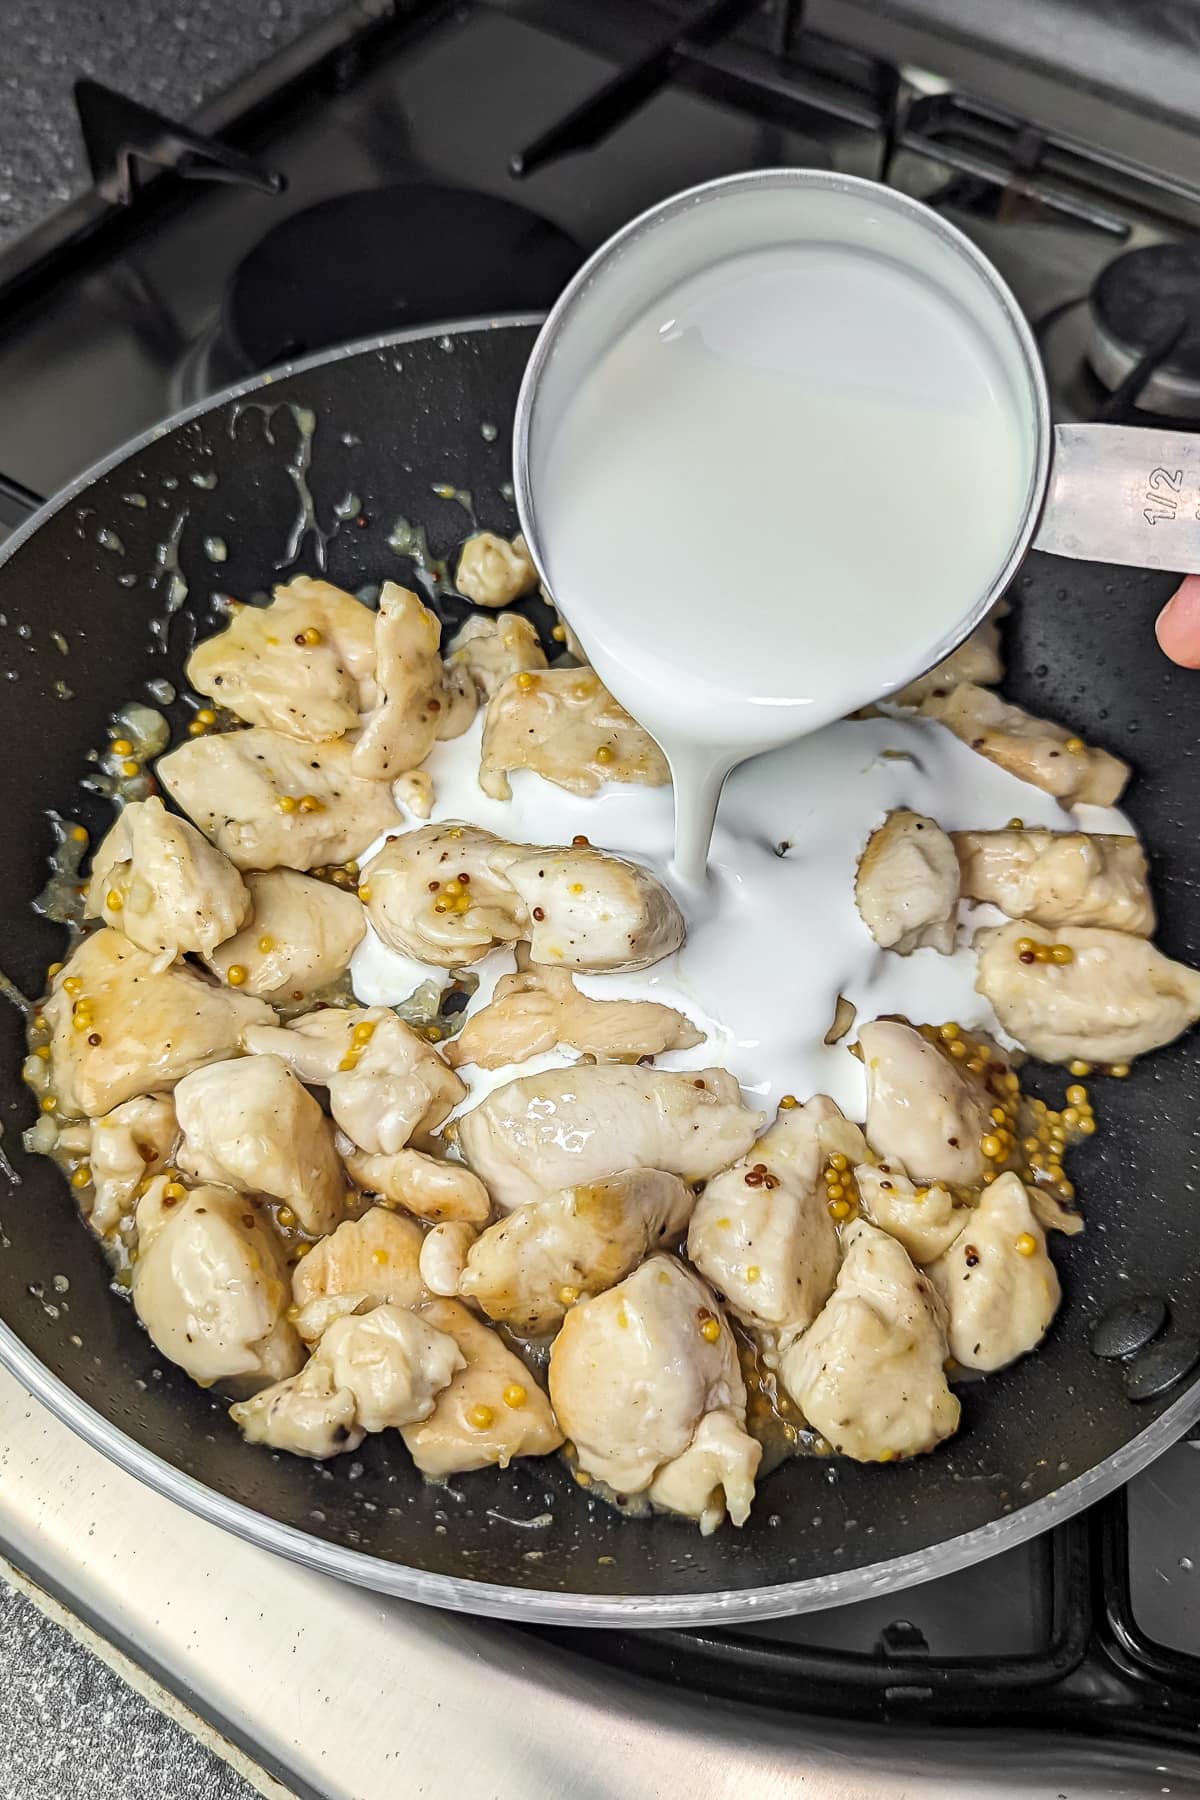 Pouring cream into the frying pan with chicken and mustard, preparing to create a creamy sauce.